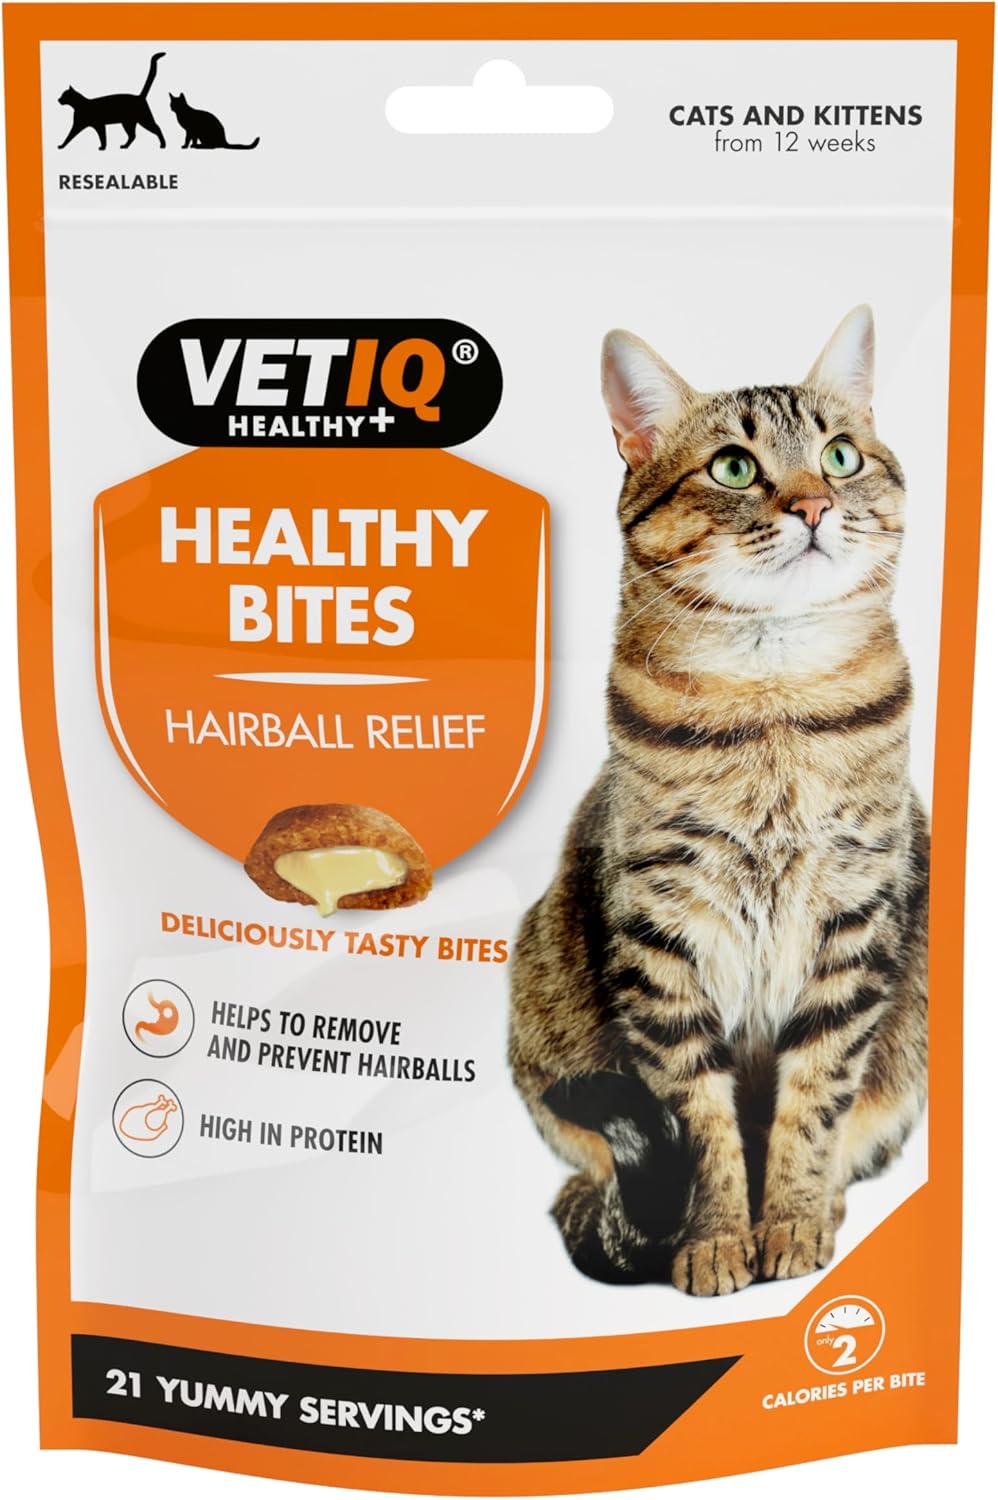 VETIQ Healthy Bites Hairball Relief Treats for Cats & Kittens 12+ Weeks, Help's Prevent & Remove Hairballs, High in Protein, 65 g (Pack of 8)?5